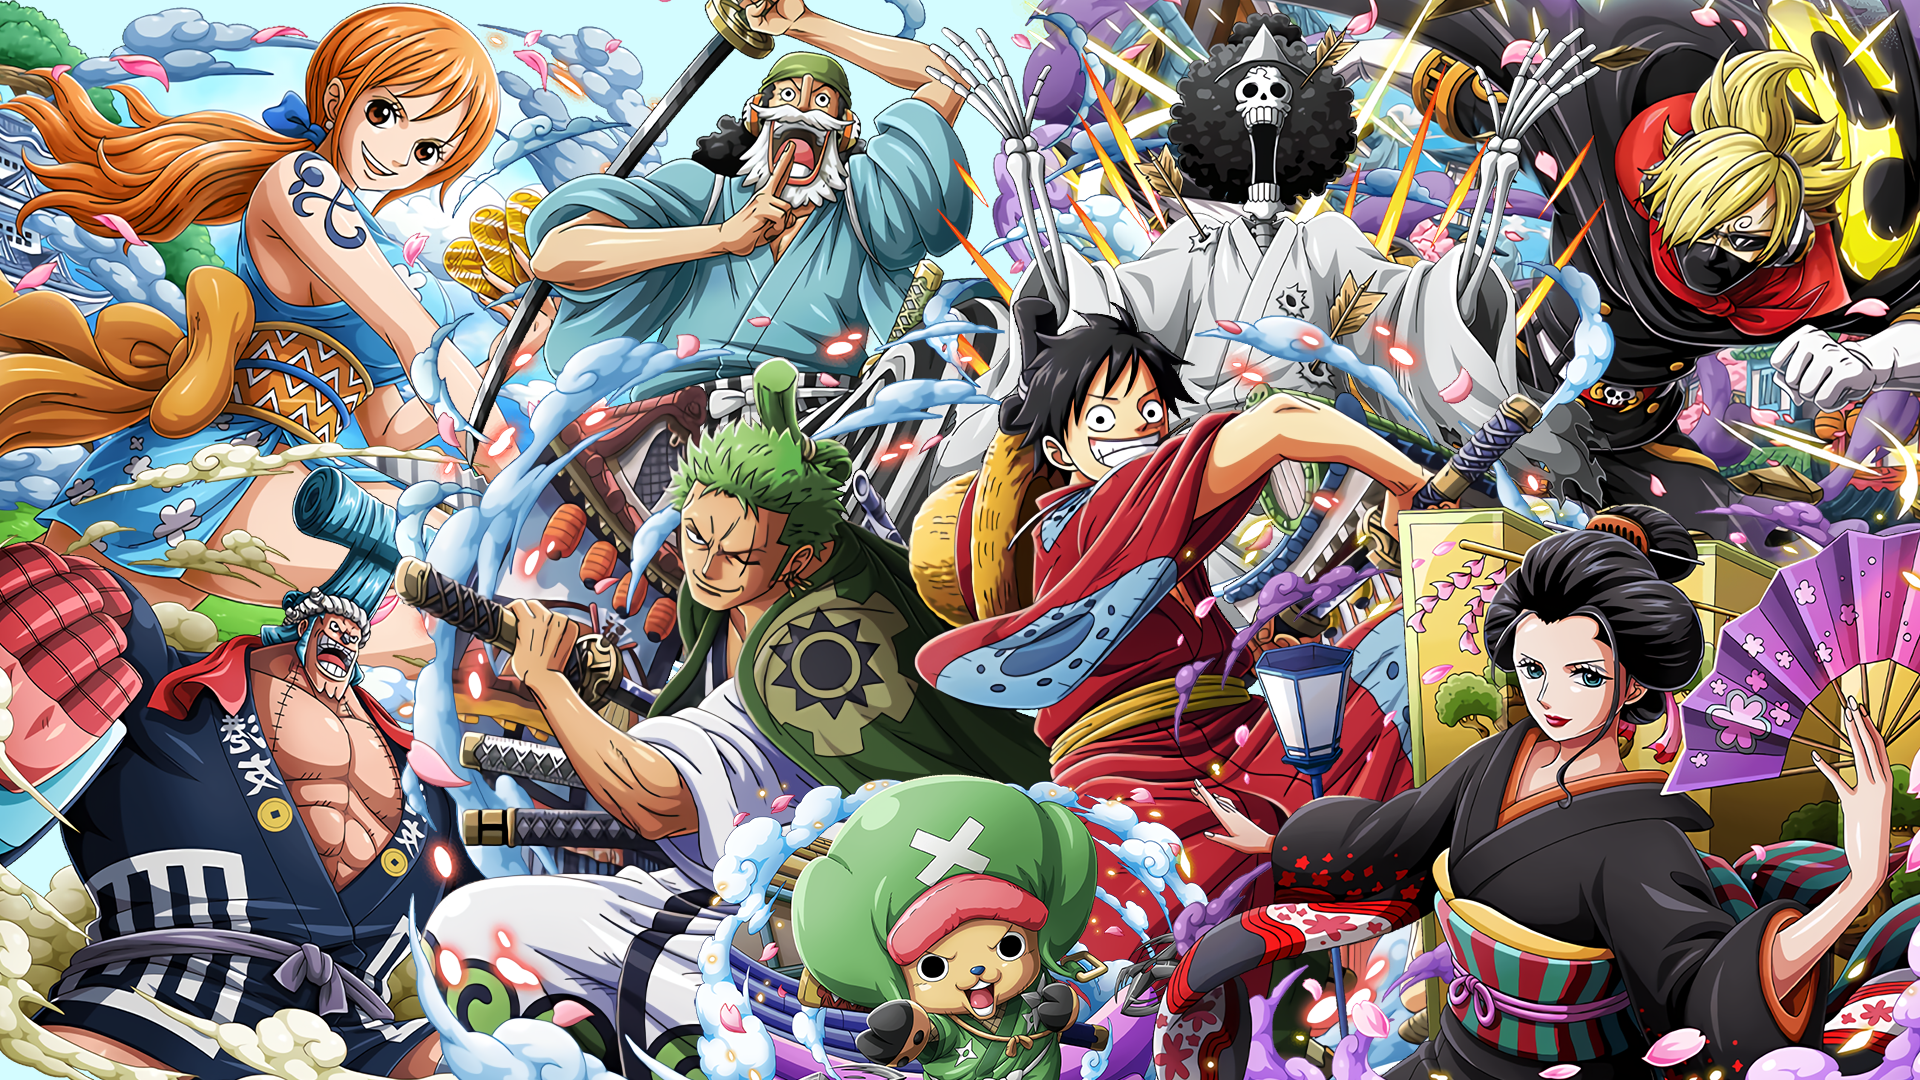 Tons of awesome anime One Piece PS4 wallpapers to download for free. 